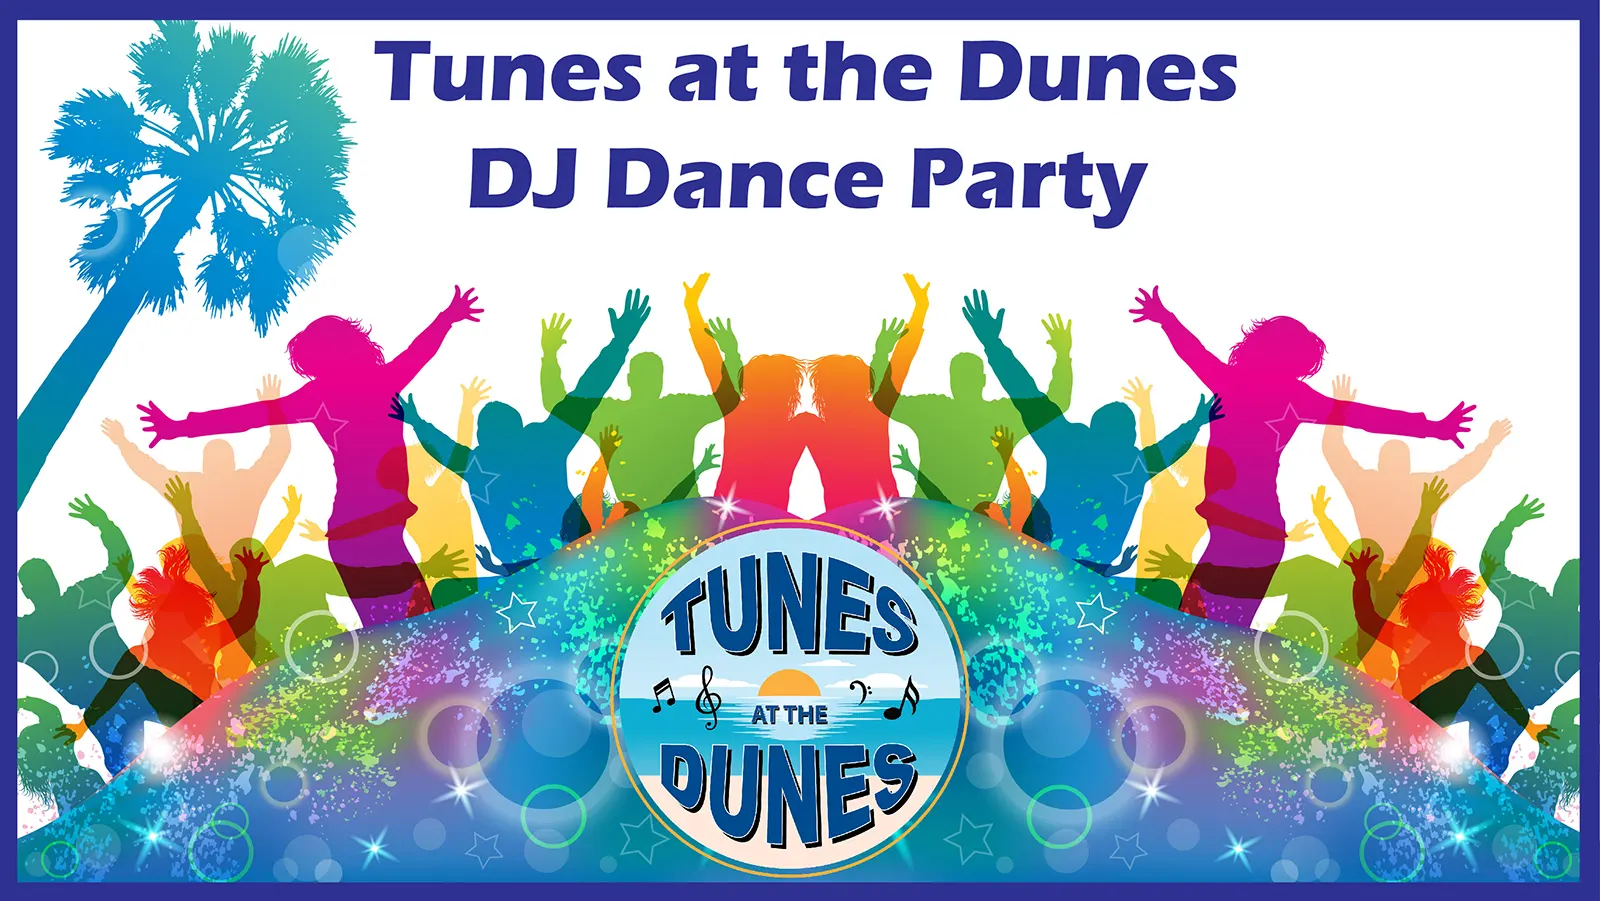 Tunes at the Dunes DJ Dance Party